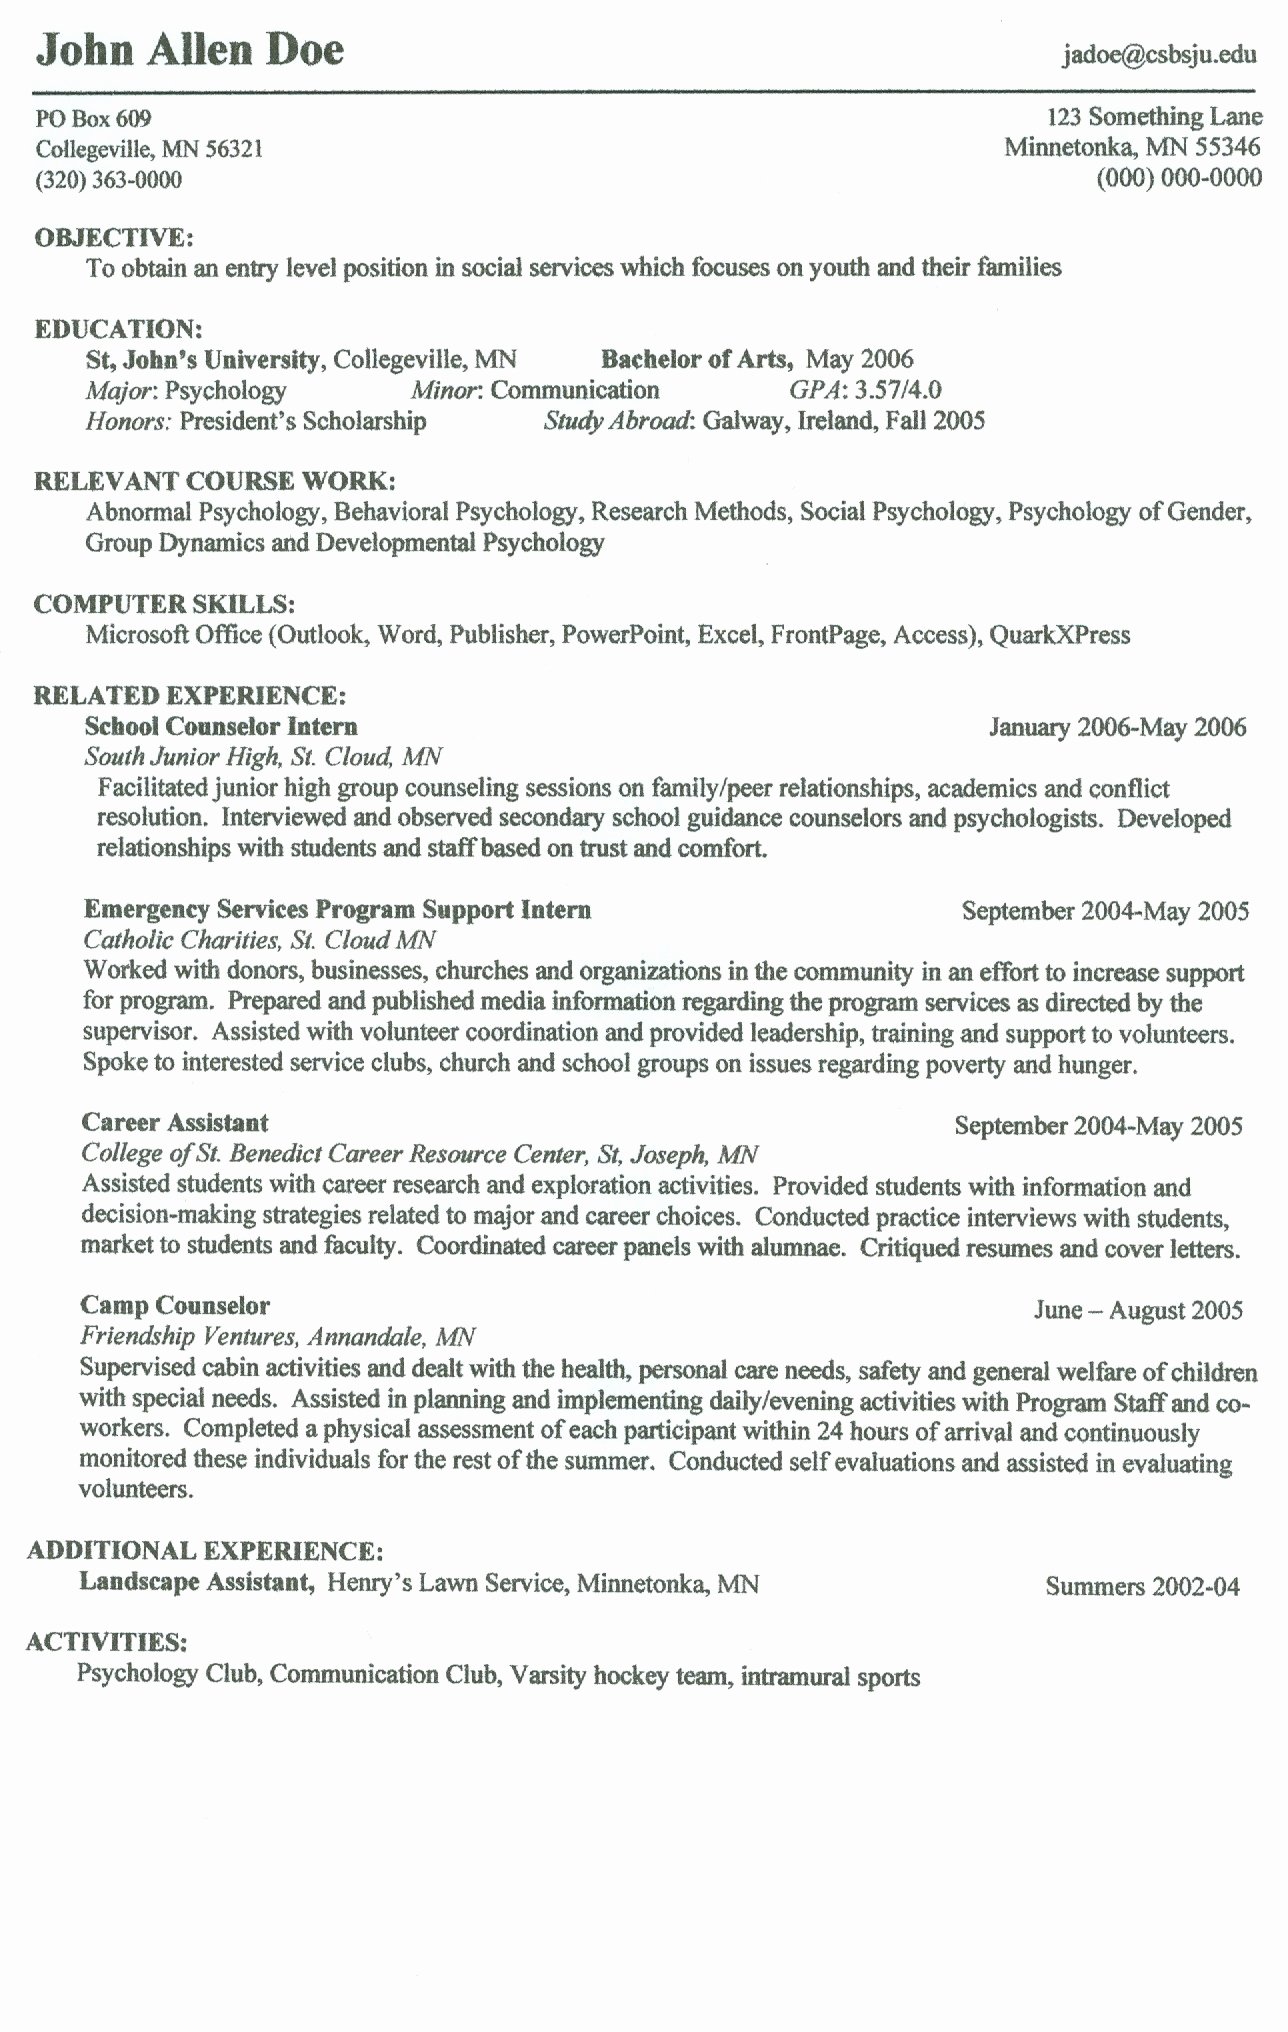 Resume for Campus Jobs Show Me A Example A Resume